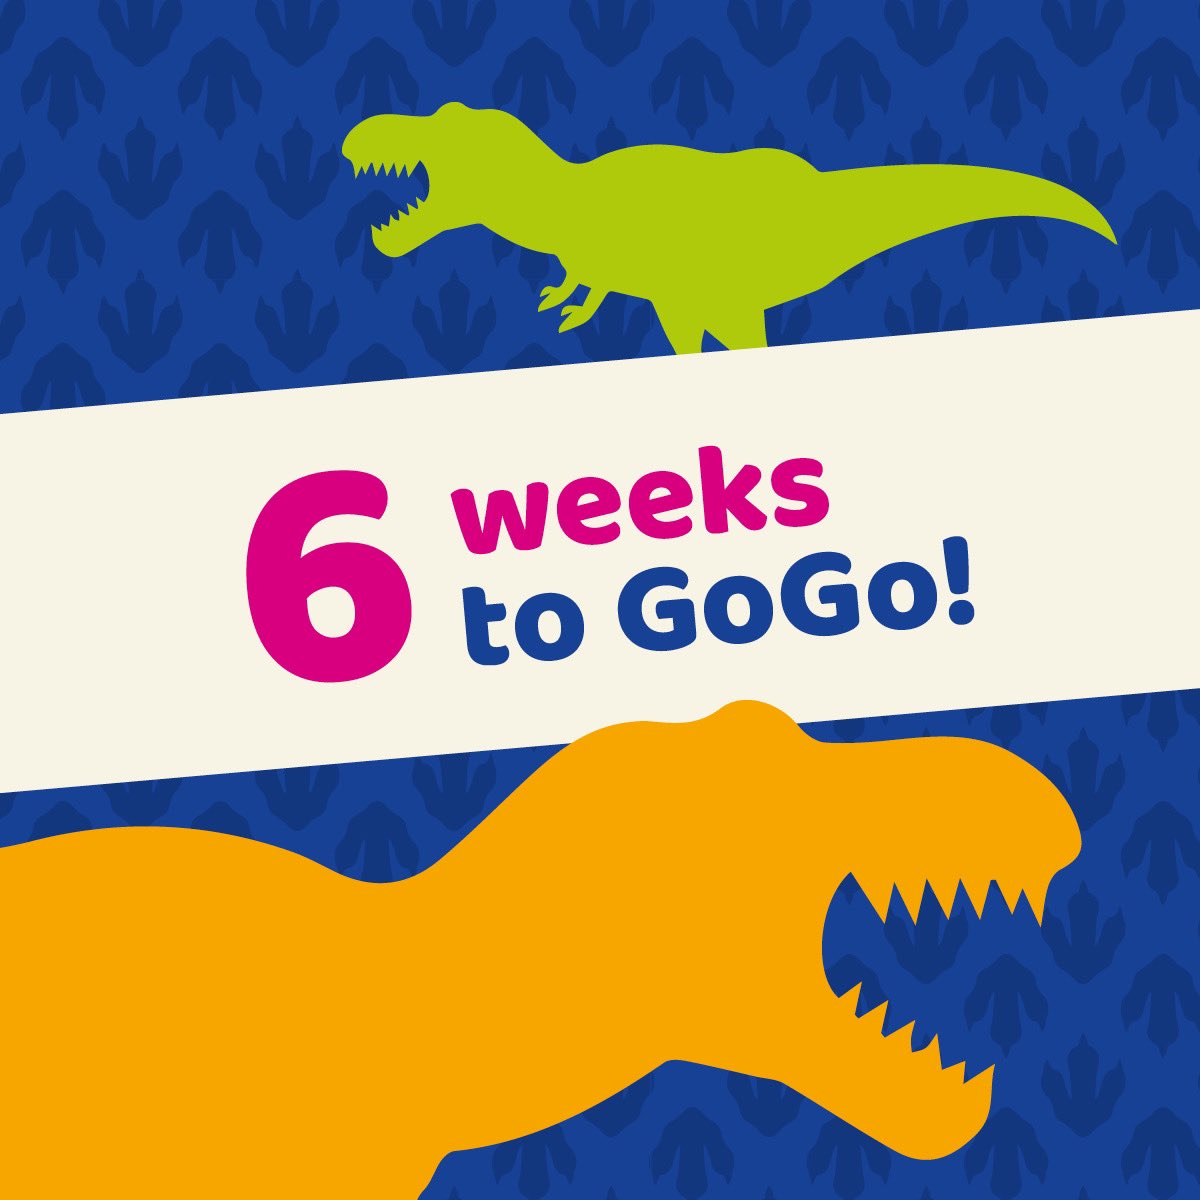 ⏰The countdown is on! 🦕6 weeks until our T.rex welcome Dippy the Diplodocus to @Nrw_Cathedral by taking to the streets of Norwich for 10 weeks creating a trail for everyone to enjoy. 🦖 Keep an eye on our socials for the next 6 weeks as we reveal T.rexciting sneak peaks!